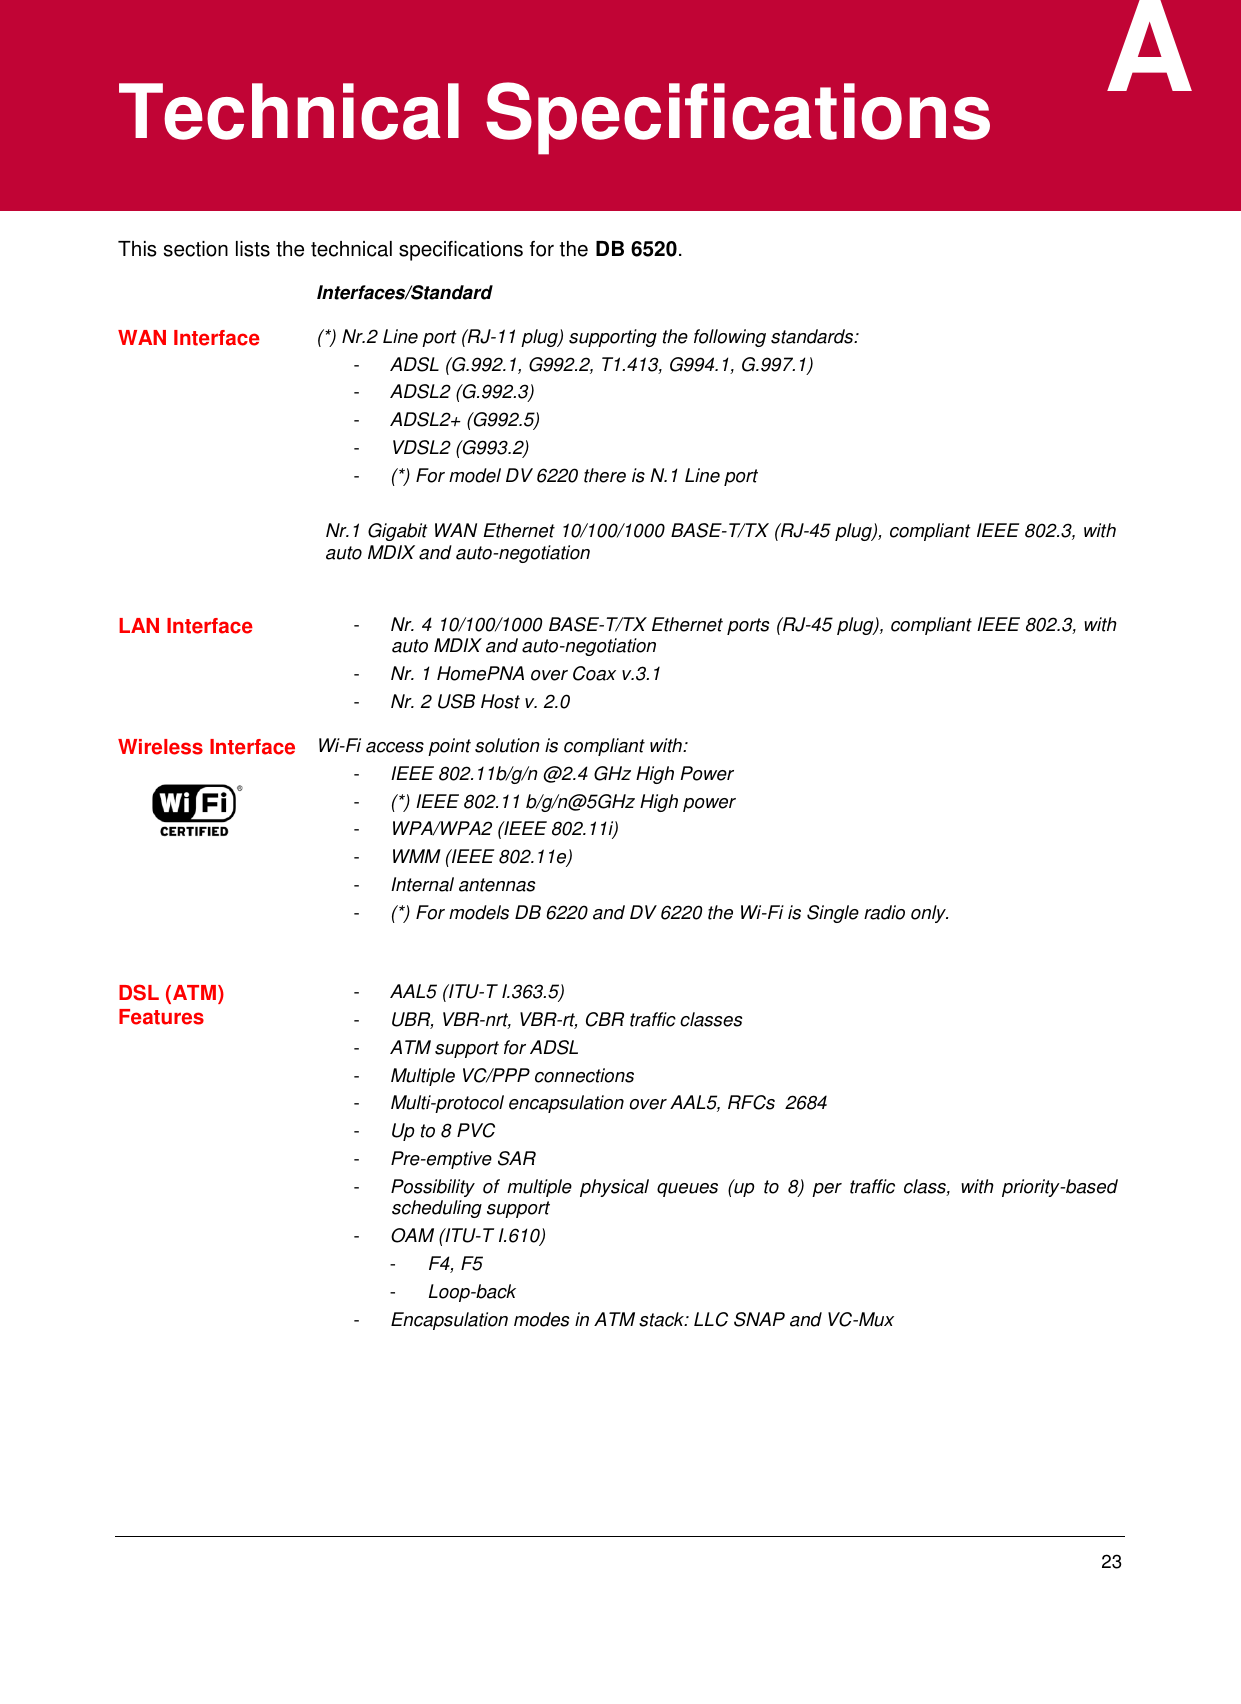         23 A Technical Specifications This section lists the technical specifications for the DB 6520.  Interfaces/Standard WAN Interface (*) Nr.2 Line port (RJ-11 plug) supporting the following standards: -  ADSL (G.992.1, G992.2, T1.413, G994.1, G.997.1) -  ADSL2 (G.992.3) -  ADSL2+ (G992.5) -  VDSL2 (G993.2) -  (*) For model DV 6220 there is N.1 Line port  Nr.1 Gigabit WAN Ethernet 10/100/1000 BASE-T/TX (RJ-45 plug), compliant IEEE 802.3, with auto MDIX and auto-negotiation  LAN Interface  -  Nr. 4 10/100/1000 BASE-T/TX Ethernet ports (RJ-45 plug), compliant IEEE 802.3, with auto MDIX and auto-negotiation -  Nr. 1 HomePNA over Coax v.3.1 -  Nr. 2 USB Host v. 2.0 Wireless Interface   Wi-Fi access point solution is compliant with: -  IEEE 802.11b/g/n @2.4 GHz High Power -  (*) IEEE 802.11 b/g/n@5GHz High power -  WPA/WPA2 (IEEE 802.11i) -  WMM (IEEE 802.11e) -  Internal antennas -  (*) For models DB 6220 and DV 6220 the Wi-Fi is Single radio only.   DSL (ATM) Features  -  AAL5 (ITU-T I.363.5) -  UBR, VBR-nrt, VBR-rt, CBR traffic classes -  ATM support for ADSL -  Multiple VC/PPP connections -  Multi-protocol encapsulation over AAL5, RFCs  2684 -  Up to 8 PVC -  Pre-emptive SAR -  Possibility  of  multiple  physical  queues  (up  to  8)  per  traffic  class,  with  priority-based scheduling support -  OAM (ITU-T I.610) -  F4, F5 -  Loop-back -  Encapsulation modes in ATM stack: LLC SNAP and VC-Mux   